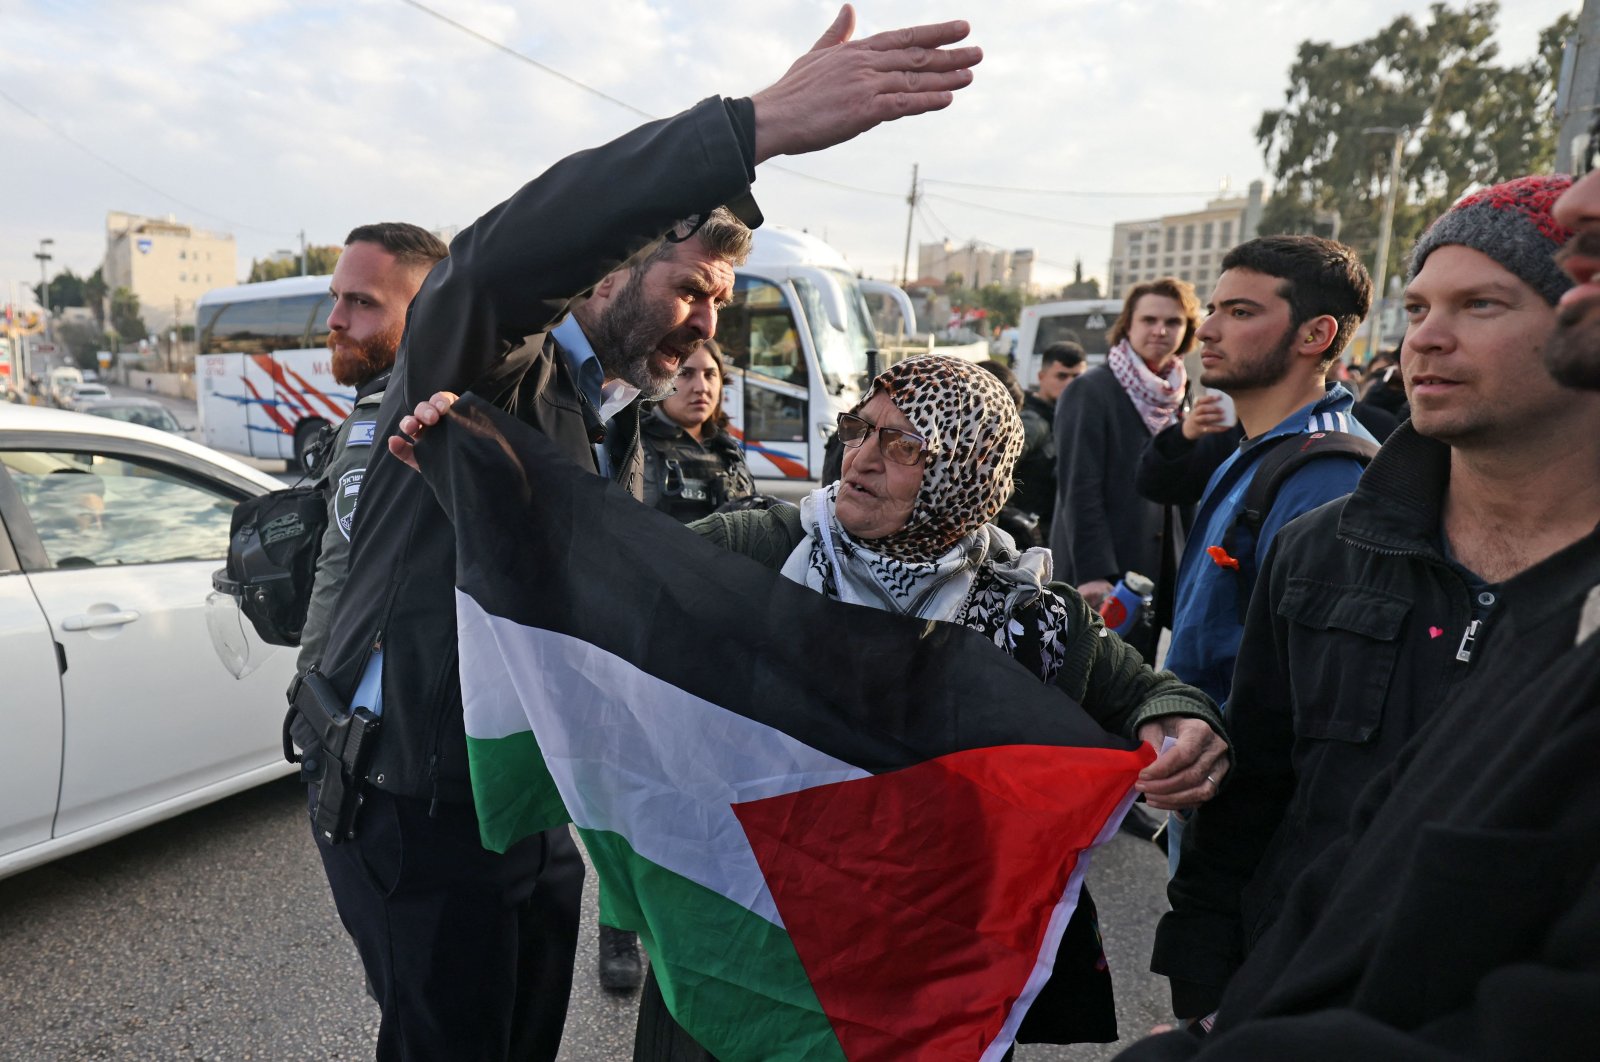 A Palestinian woman deploys a flag as she takes part in a demonstration in East Jerusalem, Palestine, Jan. 13, 2023. (AFP Photo)